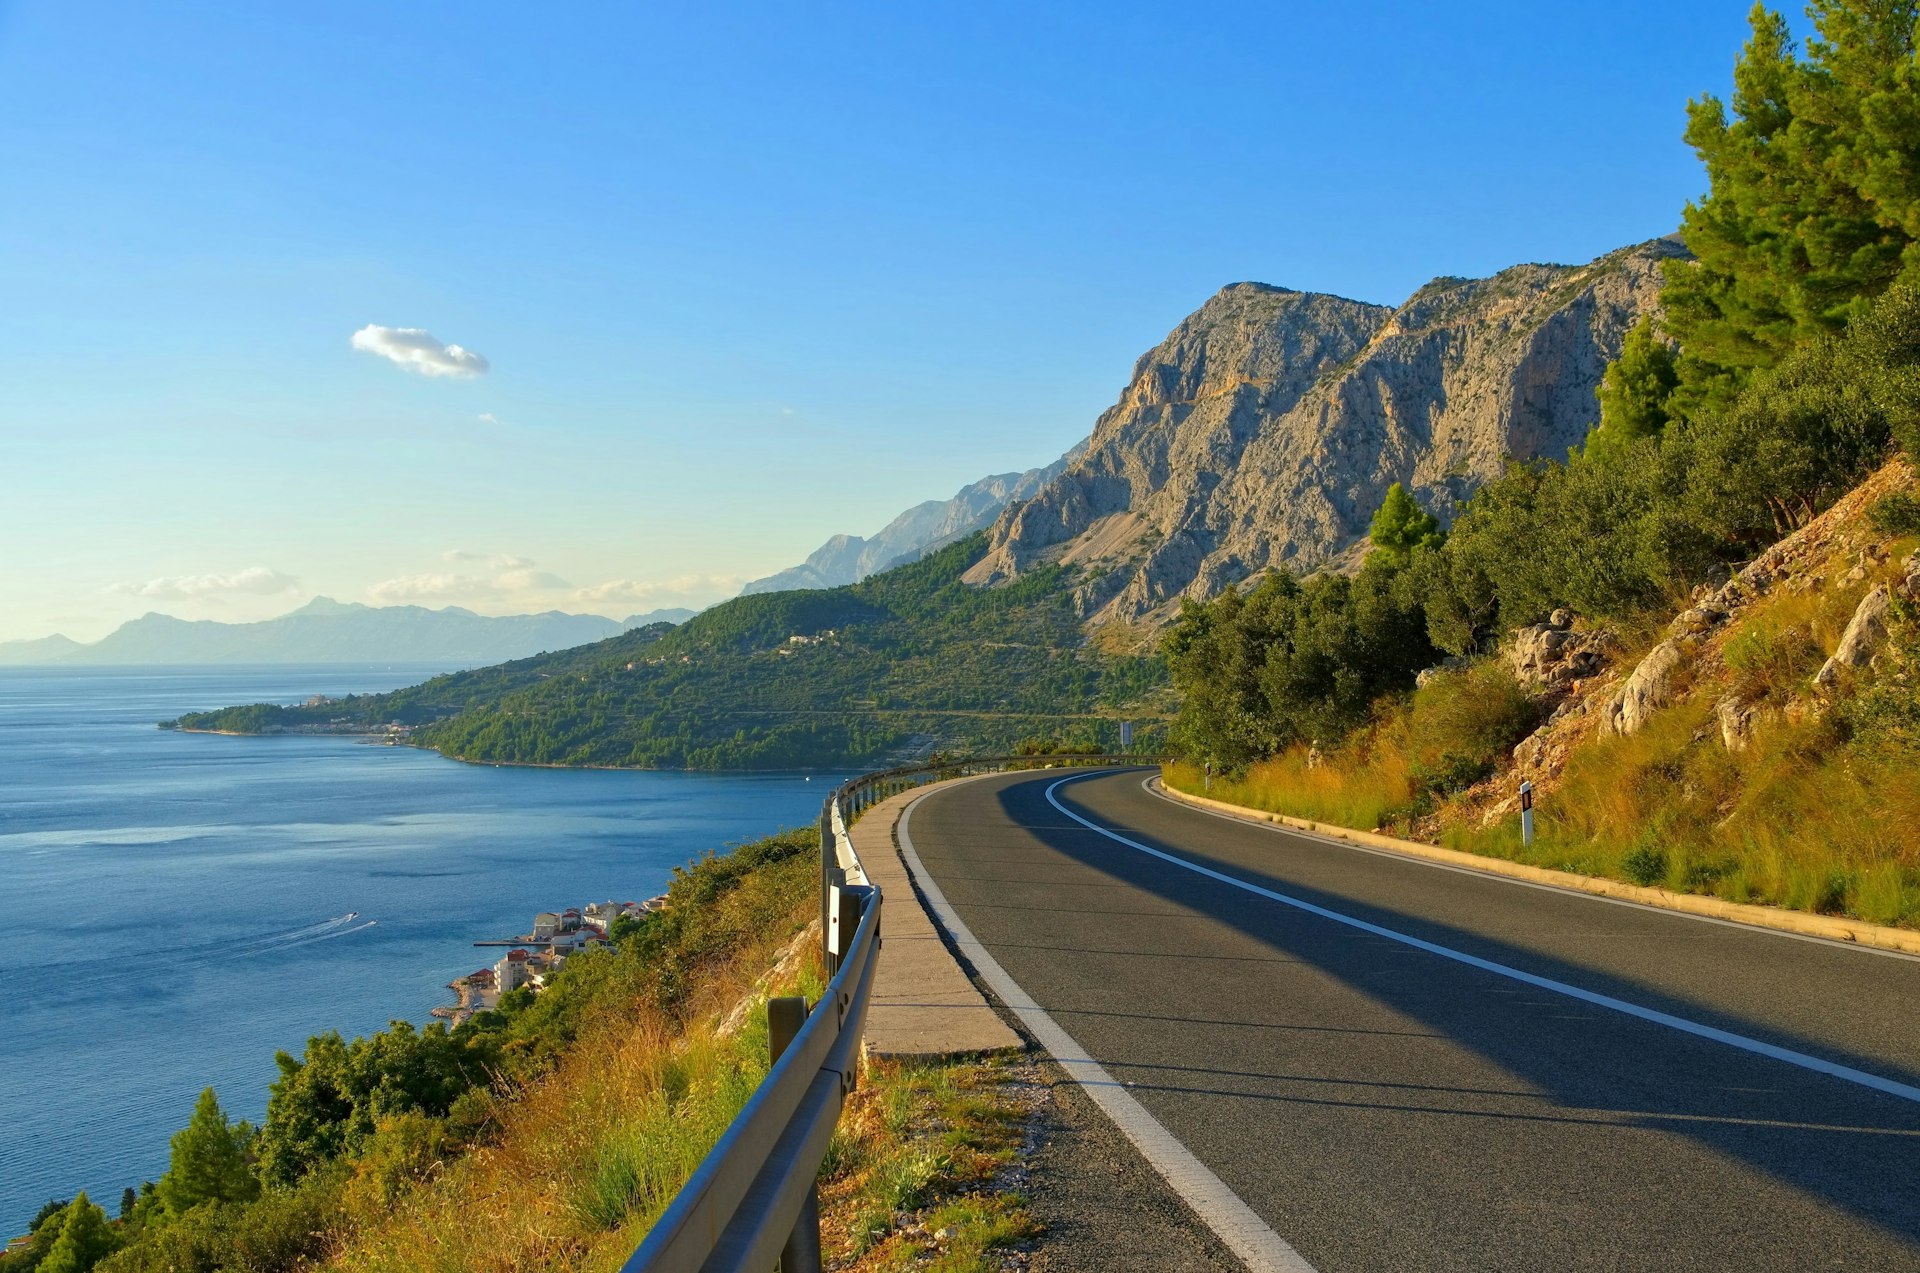 The Coast road - or Adriatic Highway - in Croatia at sunset